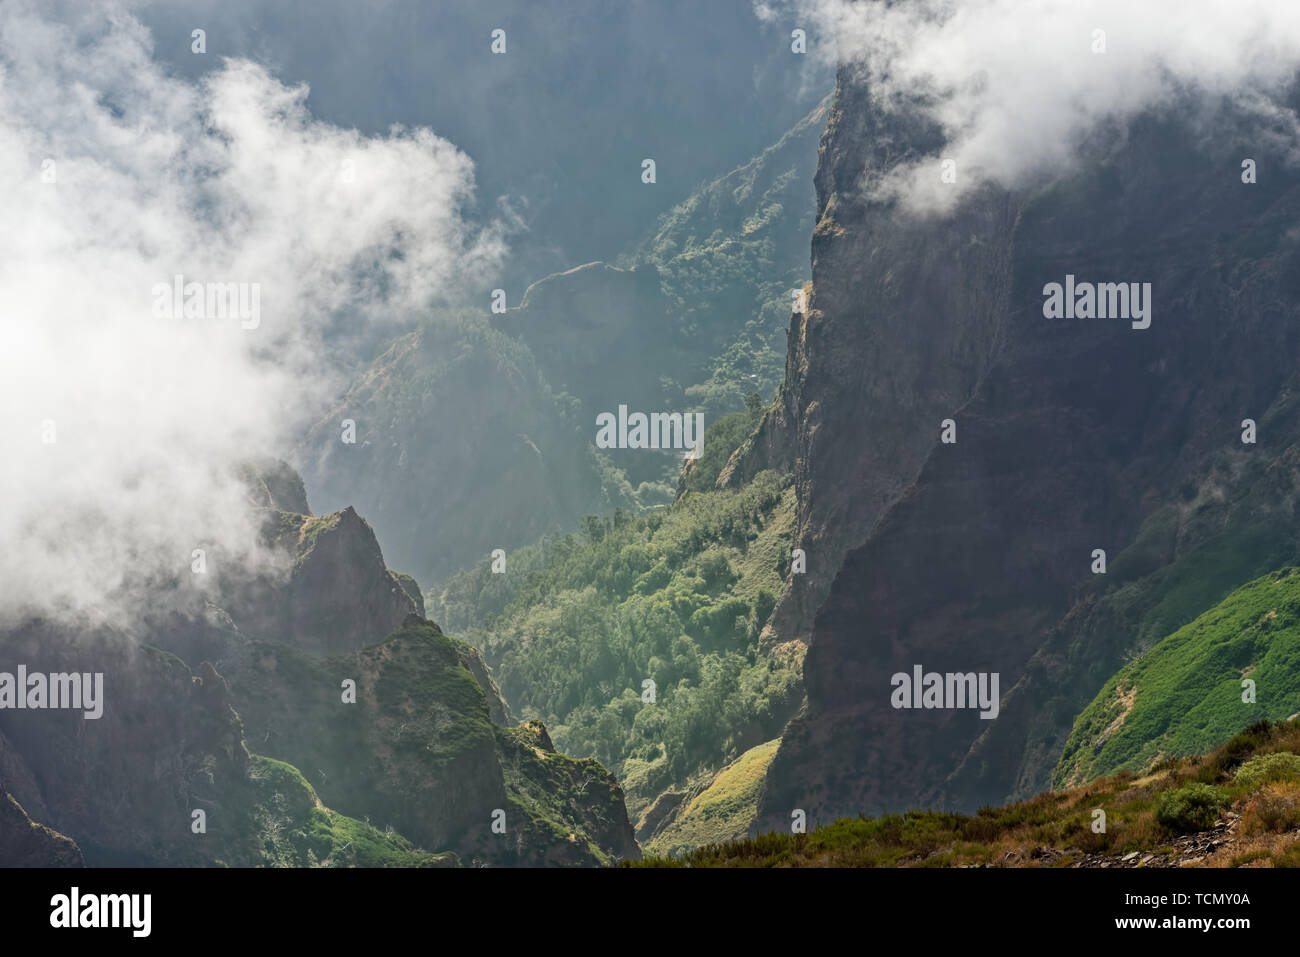 View down from mountain peak at a valley in distant. Pico do Arieiro on Portuguese island of Madeira Stock Photo